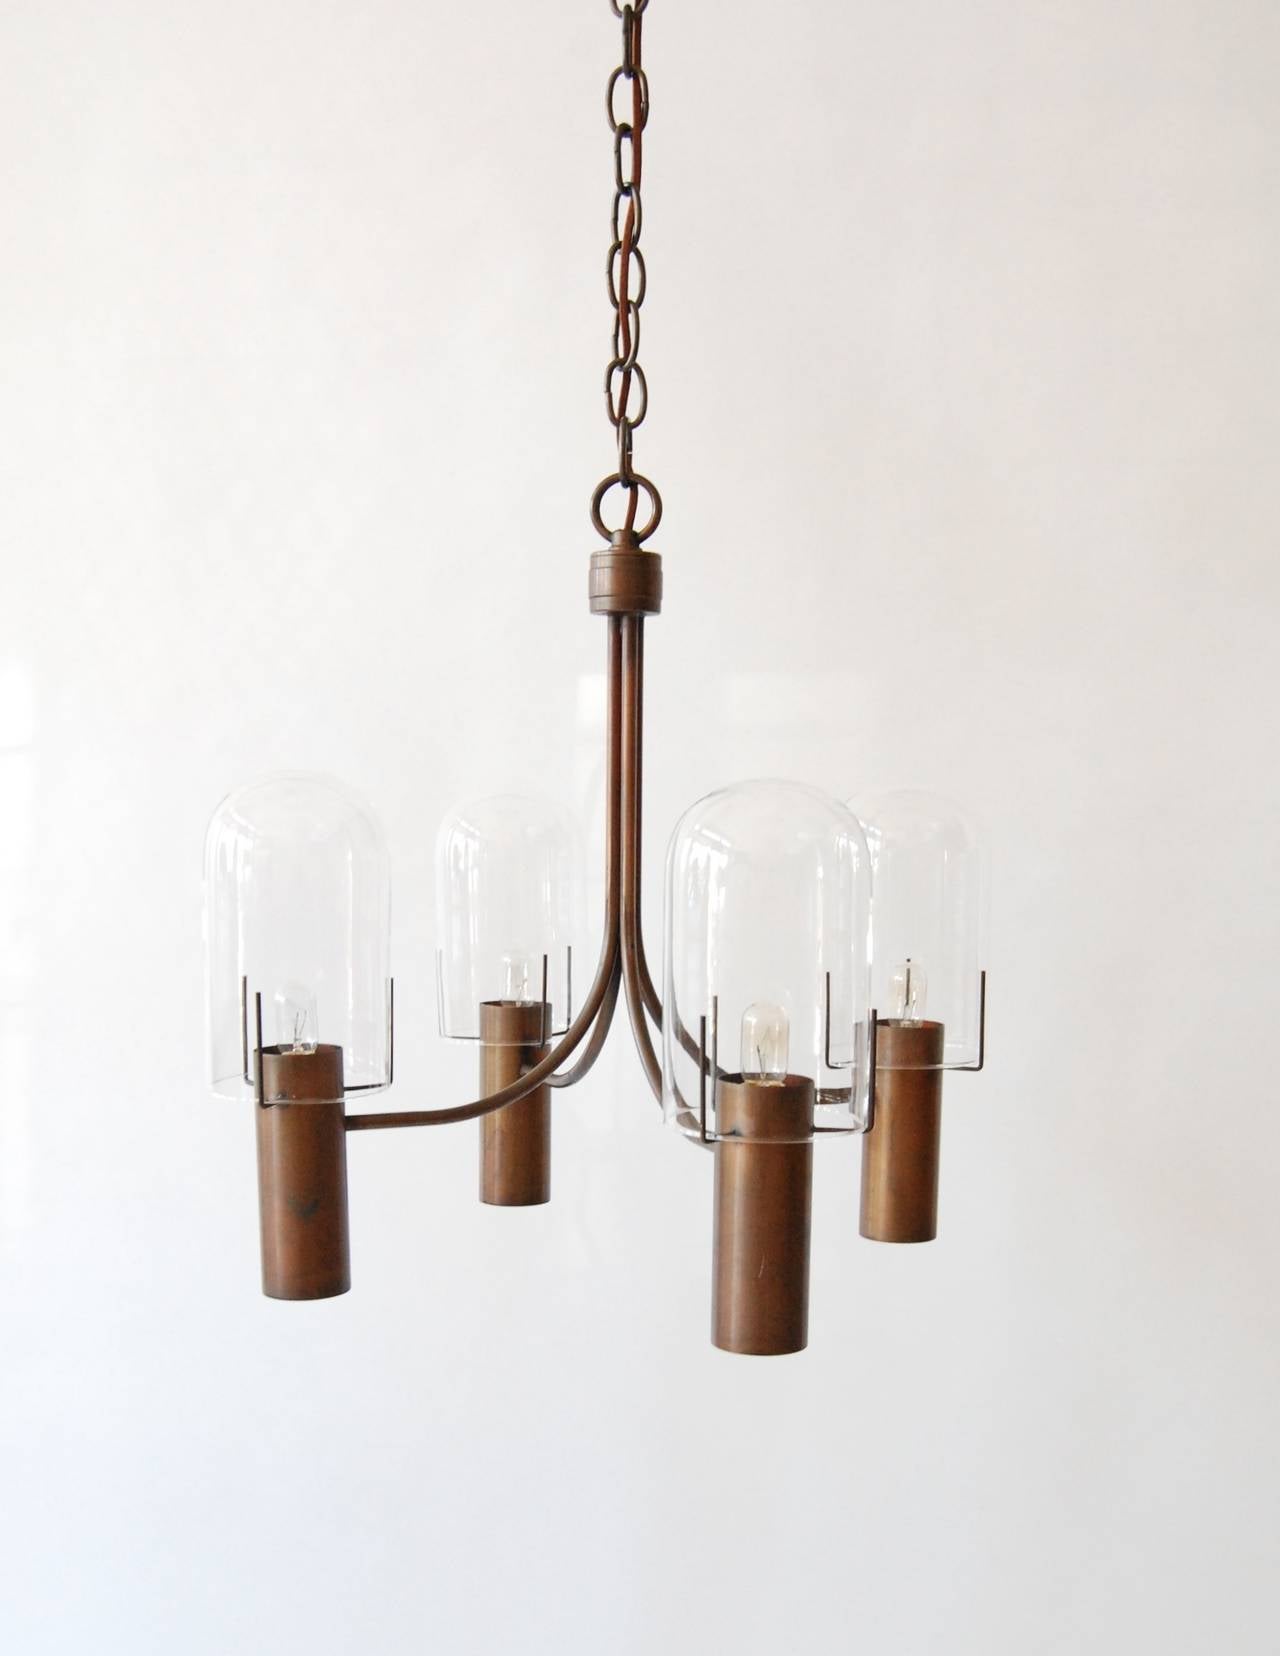 Four-arm canister lamp designed by Stuart Barnes for the Robert Long lamp company. Each canister has a top and bottom light, the top bulbs are covered with glass domes, the bottom ones are recessed inside the canisters. The lamp has a patinated